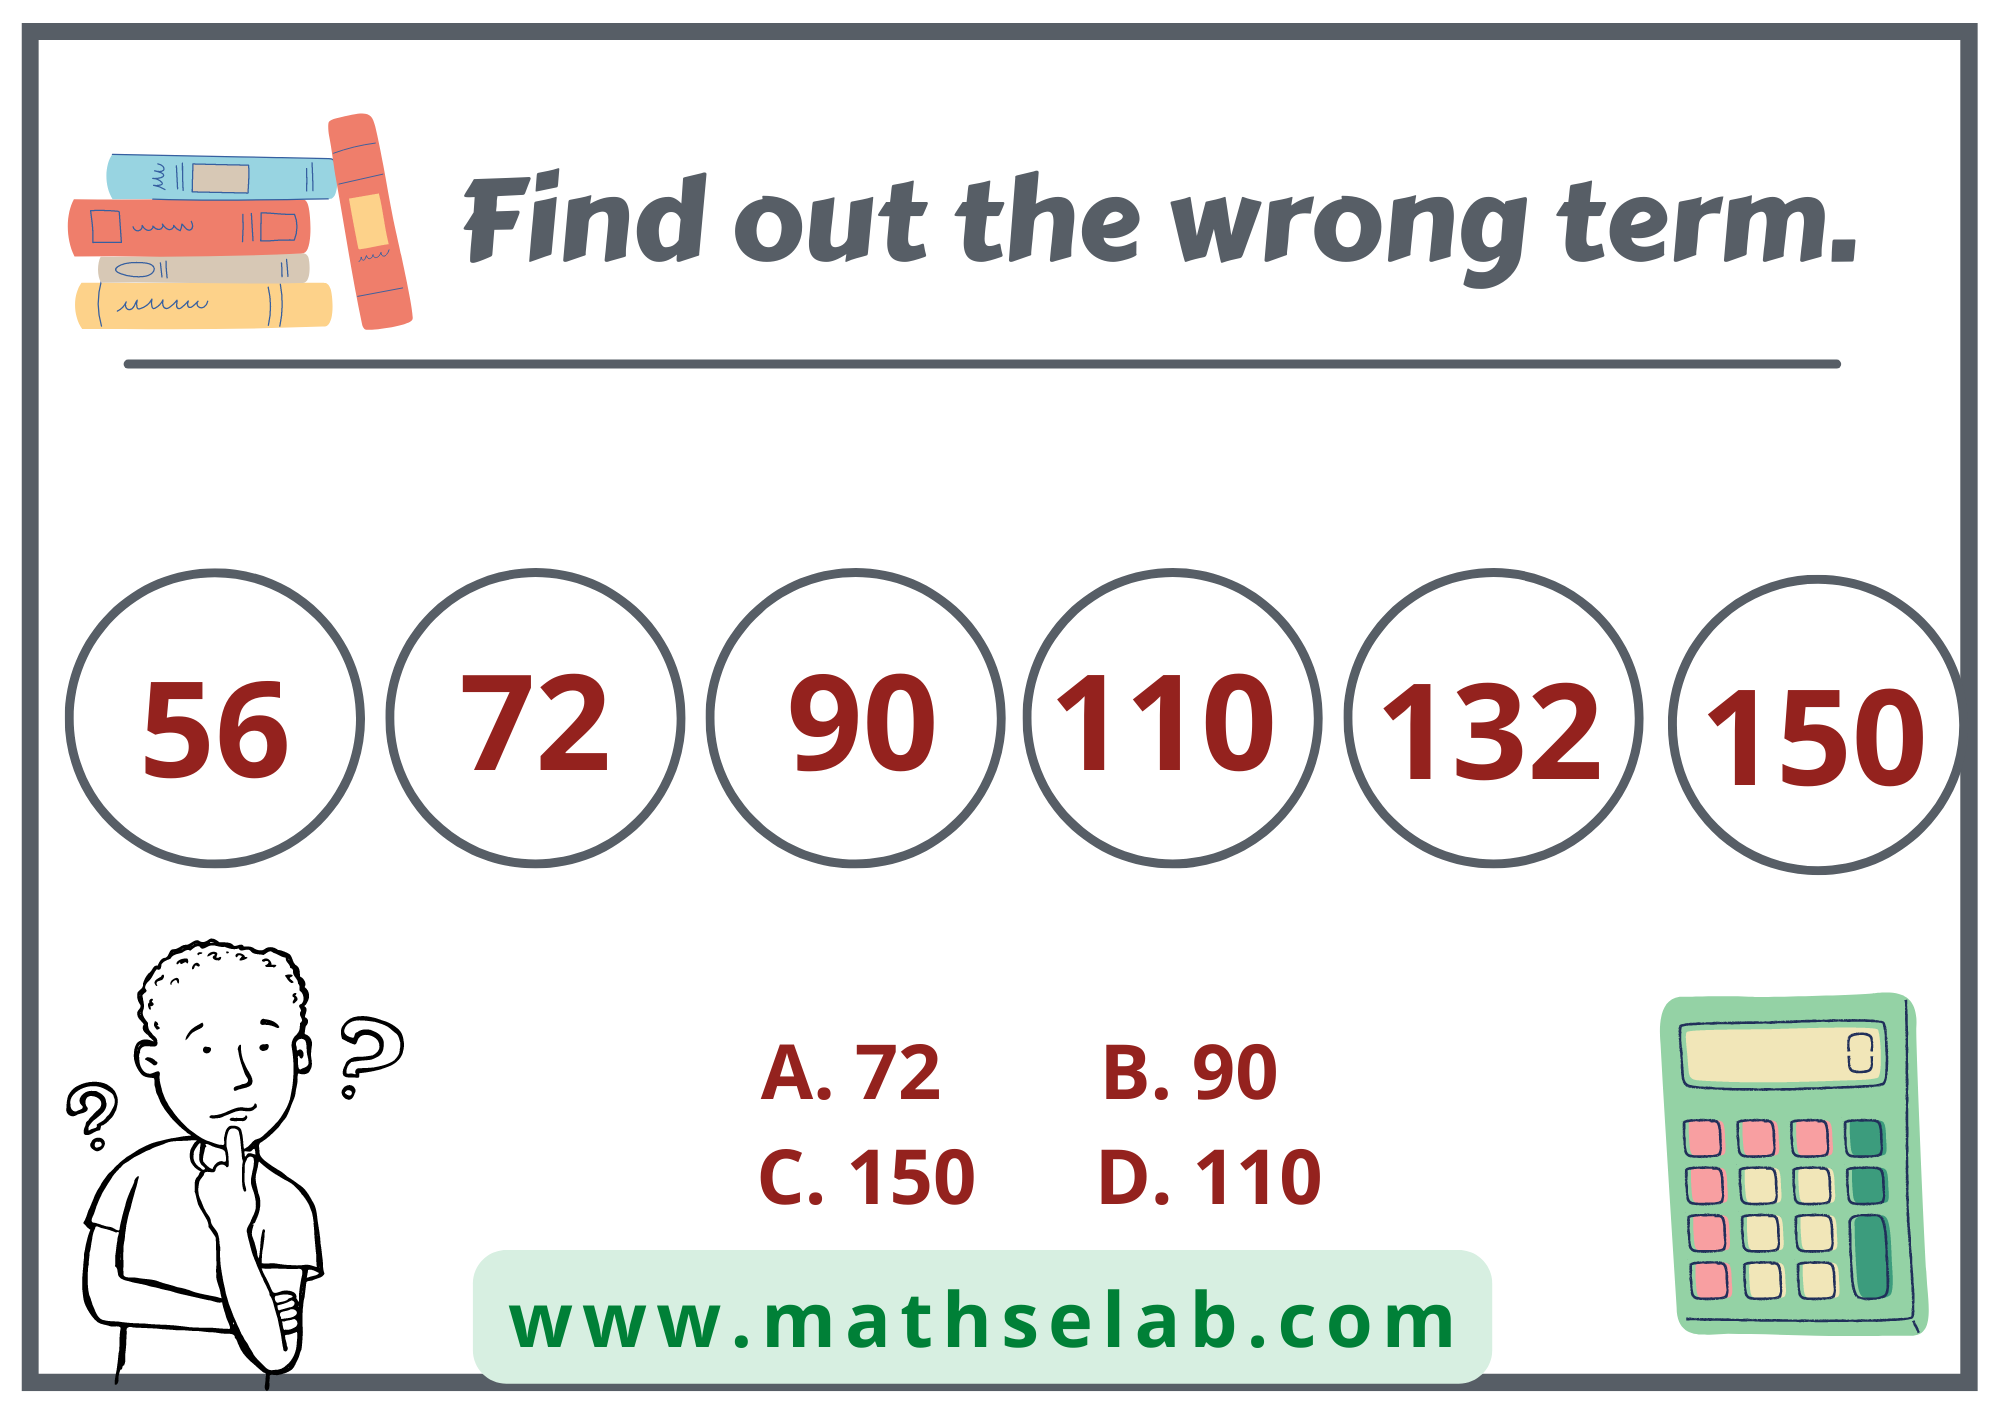 Find out the wrong term. 56, 72, 90, 110, 132, 150 - www.mathselab.com